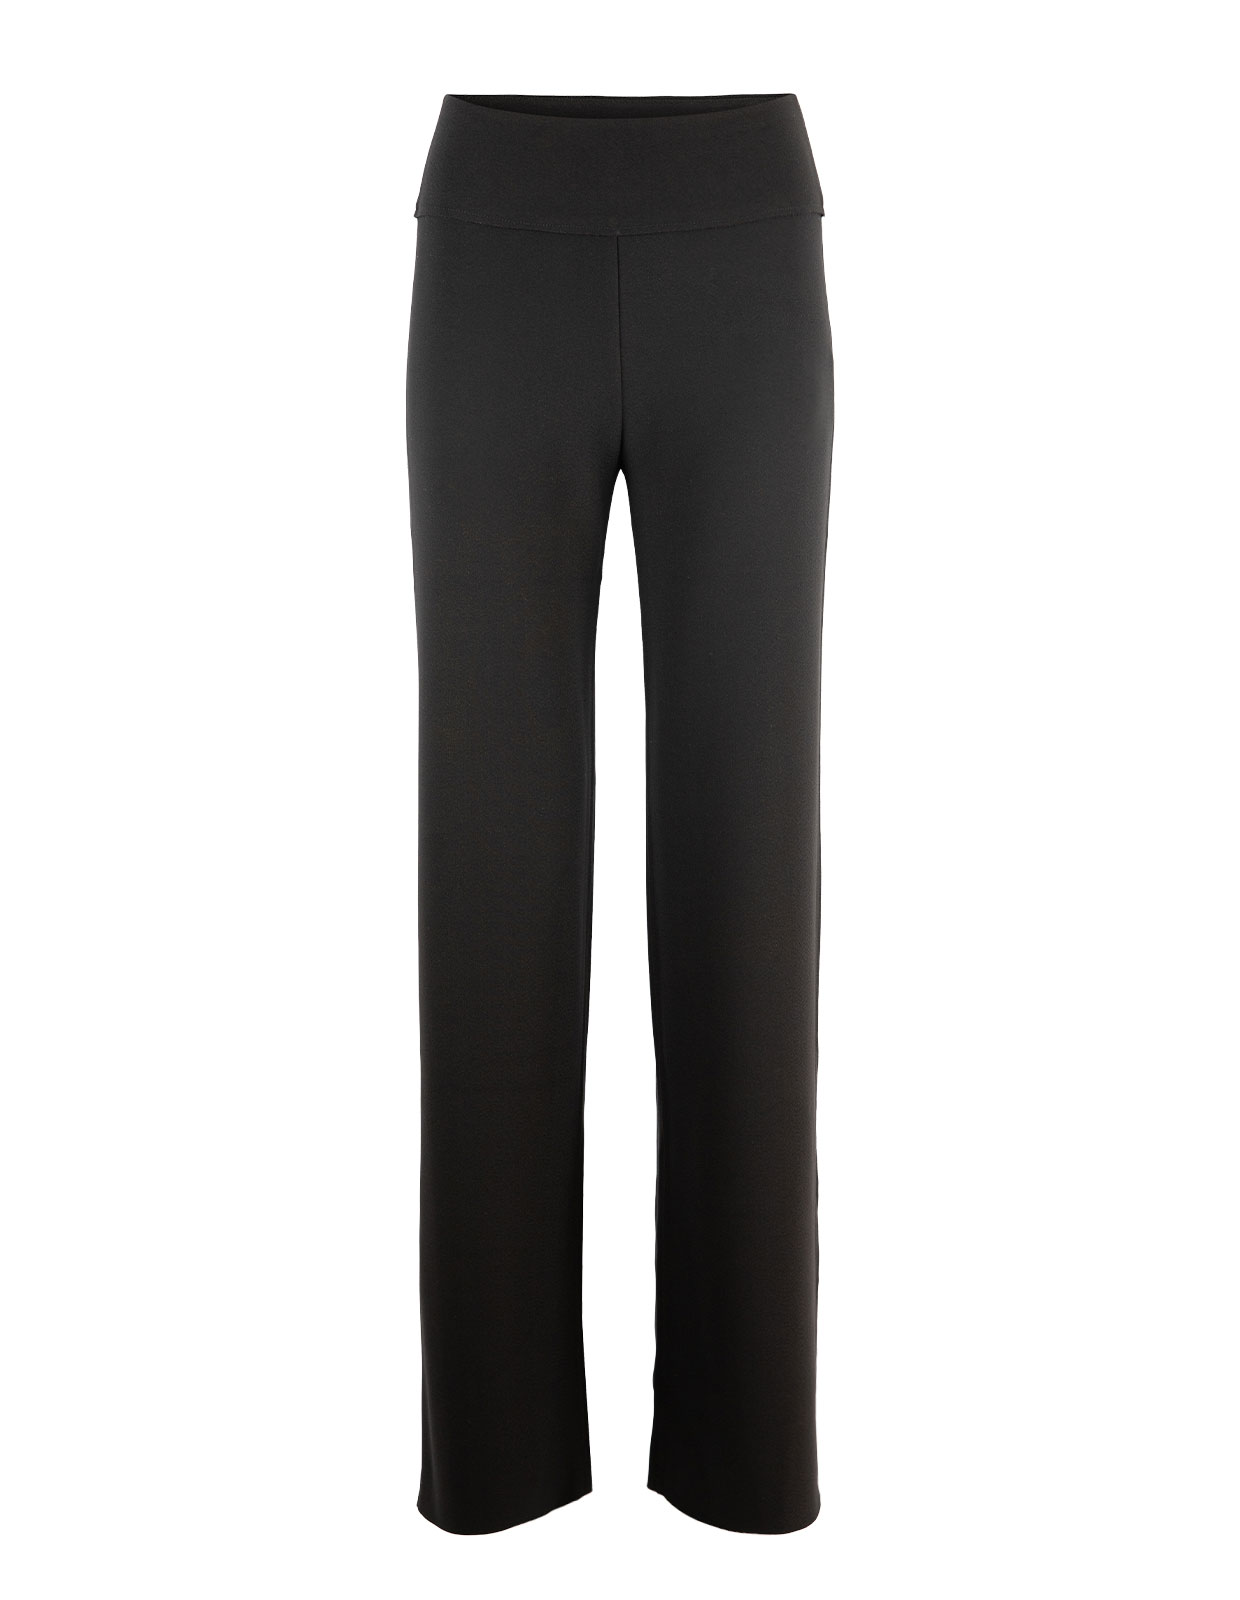 Angie Stretch Trousers Long Black